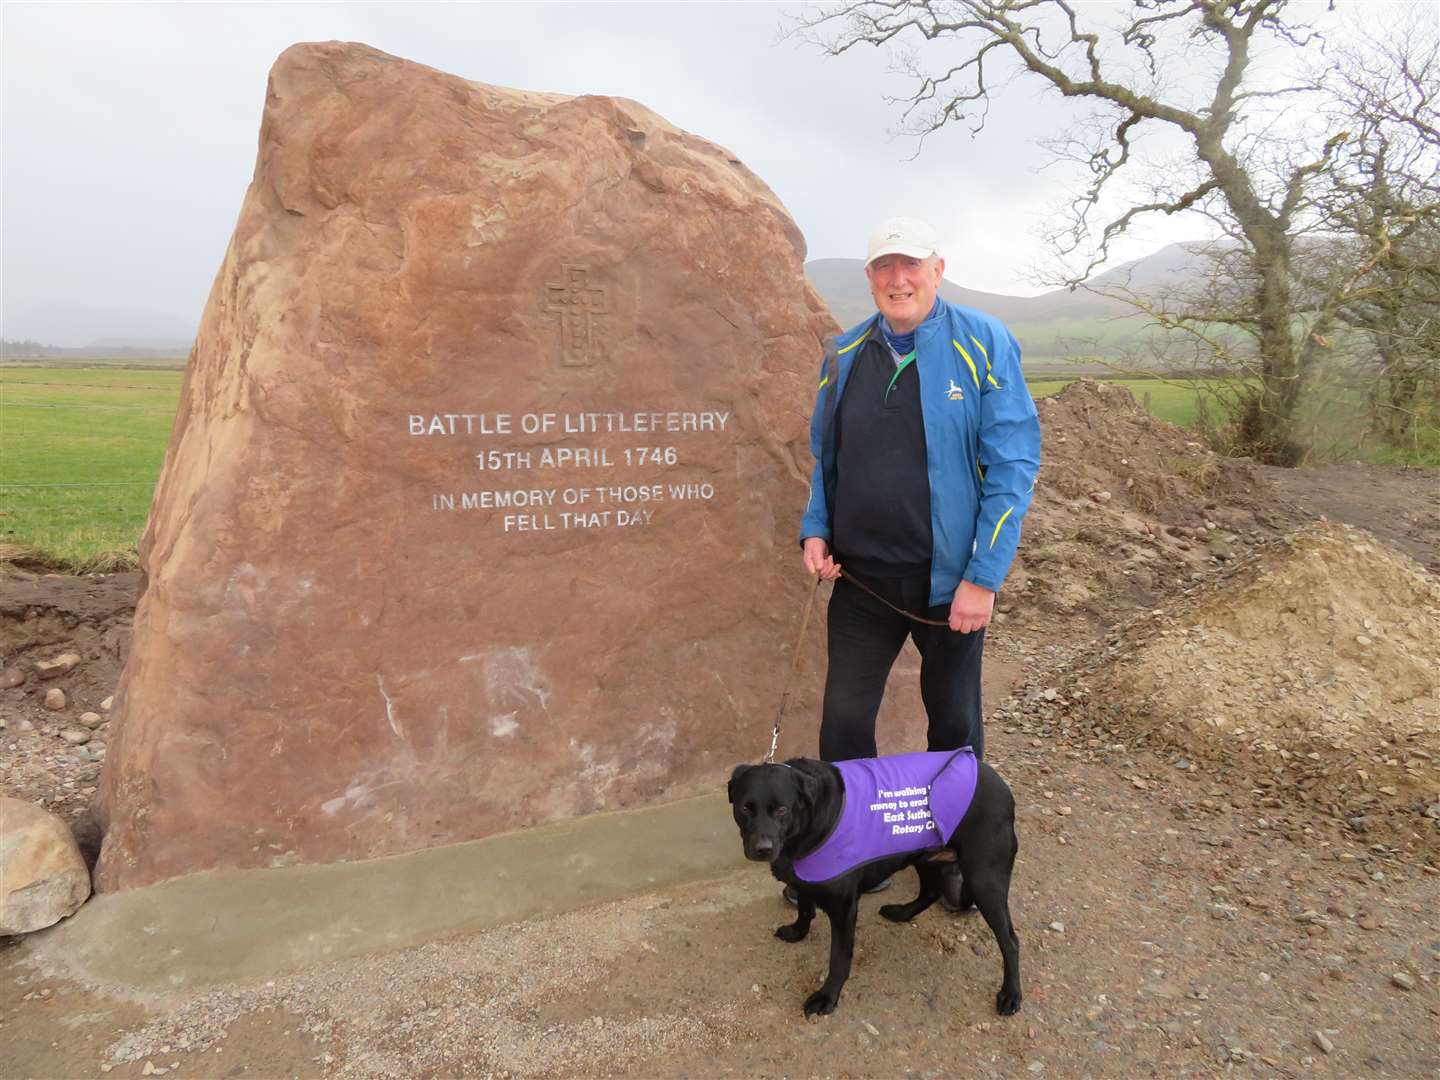 Rotarian Alistair Risk ranged far and wide, including to the Littleferry Battle memorial stone.